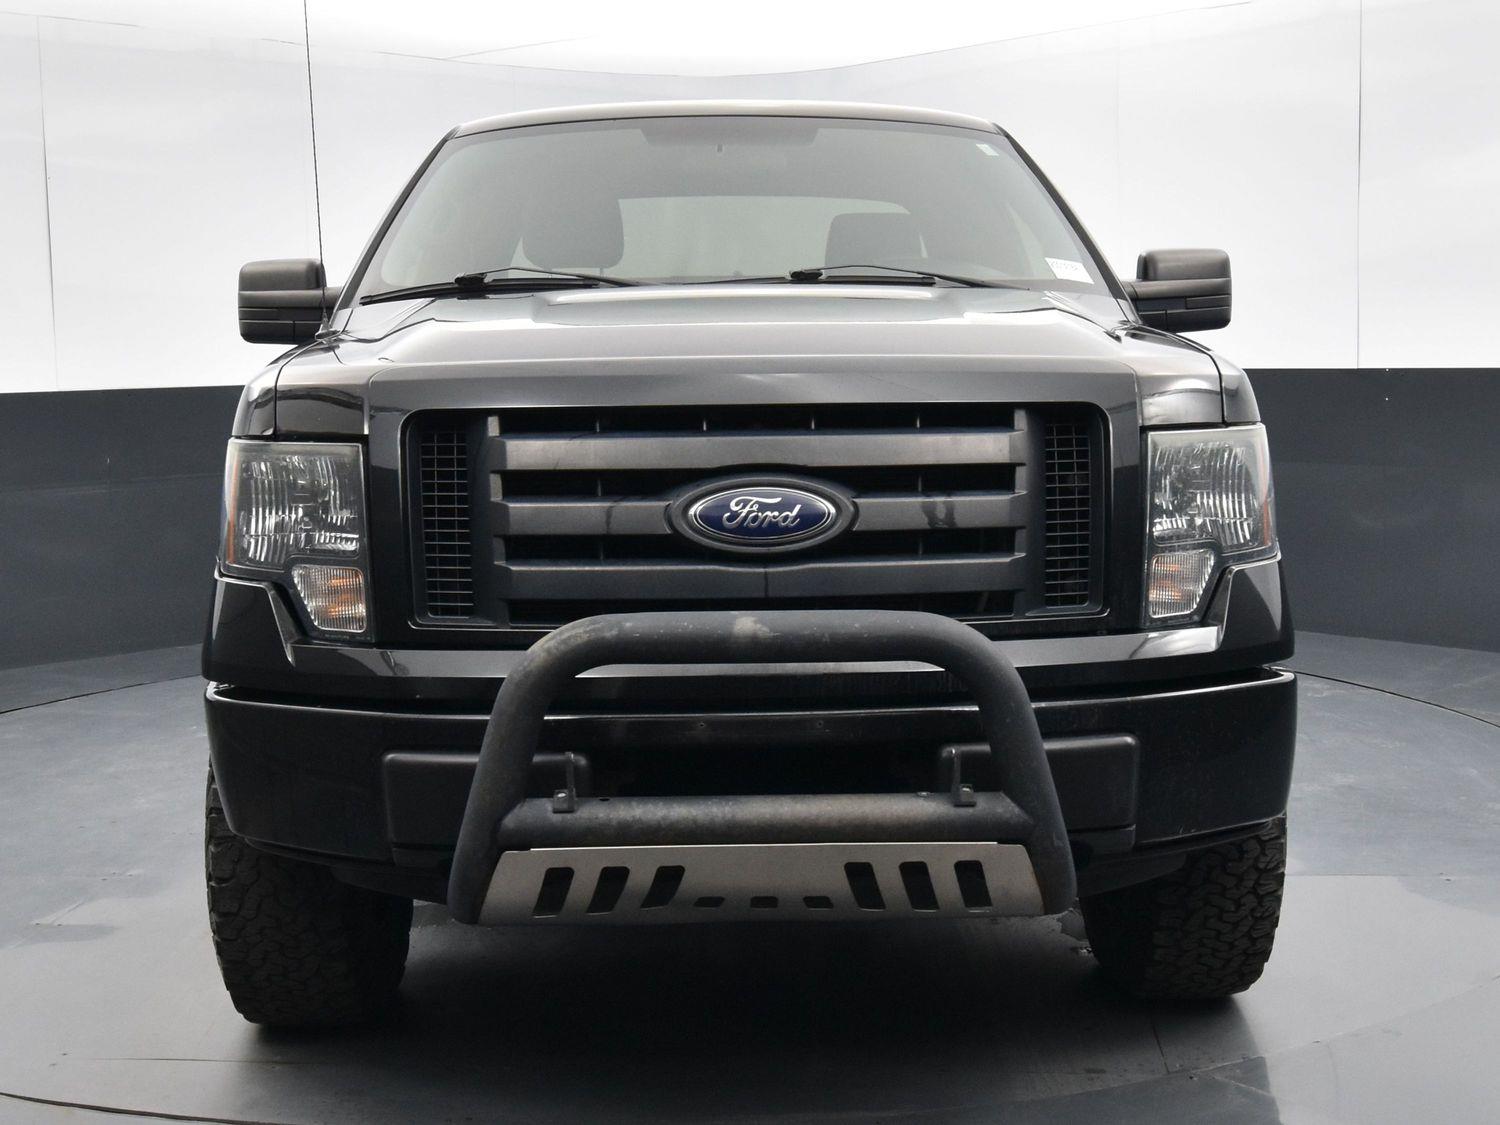 Used 2012 Ford F-150 STX Extended Cab Pickup for sale in Grand Island NE